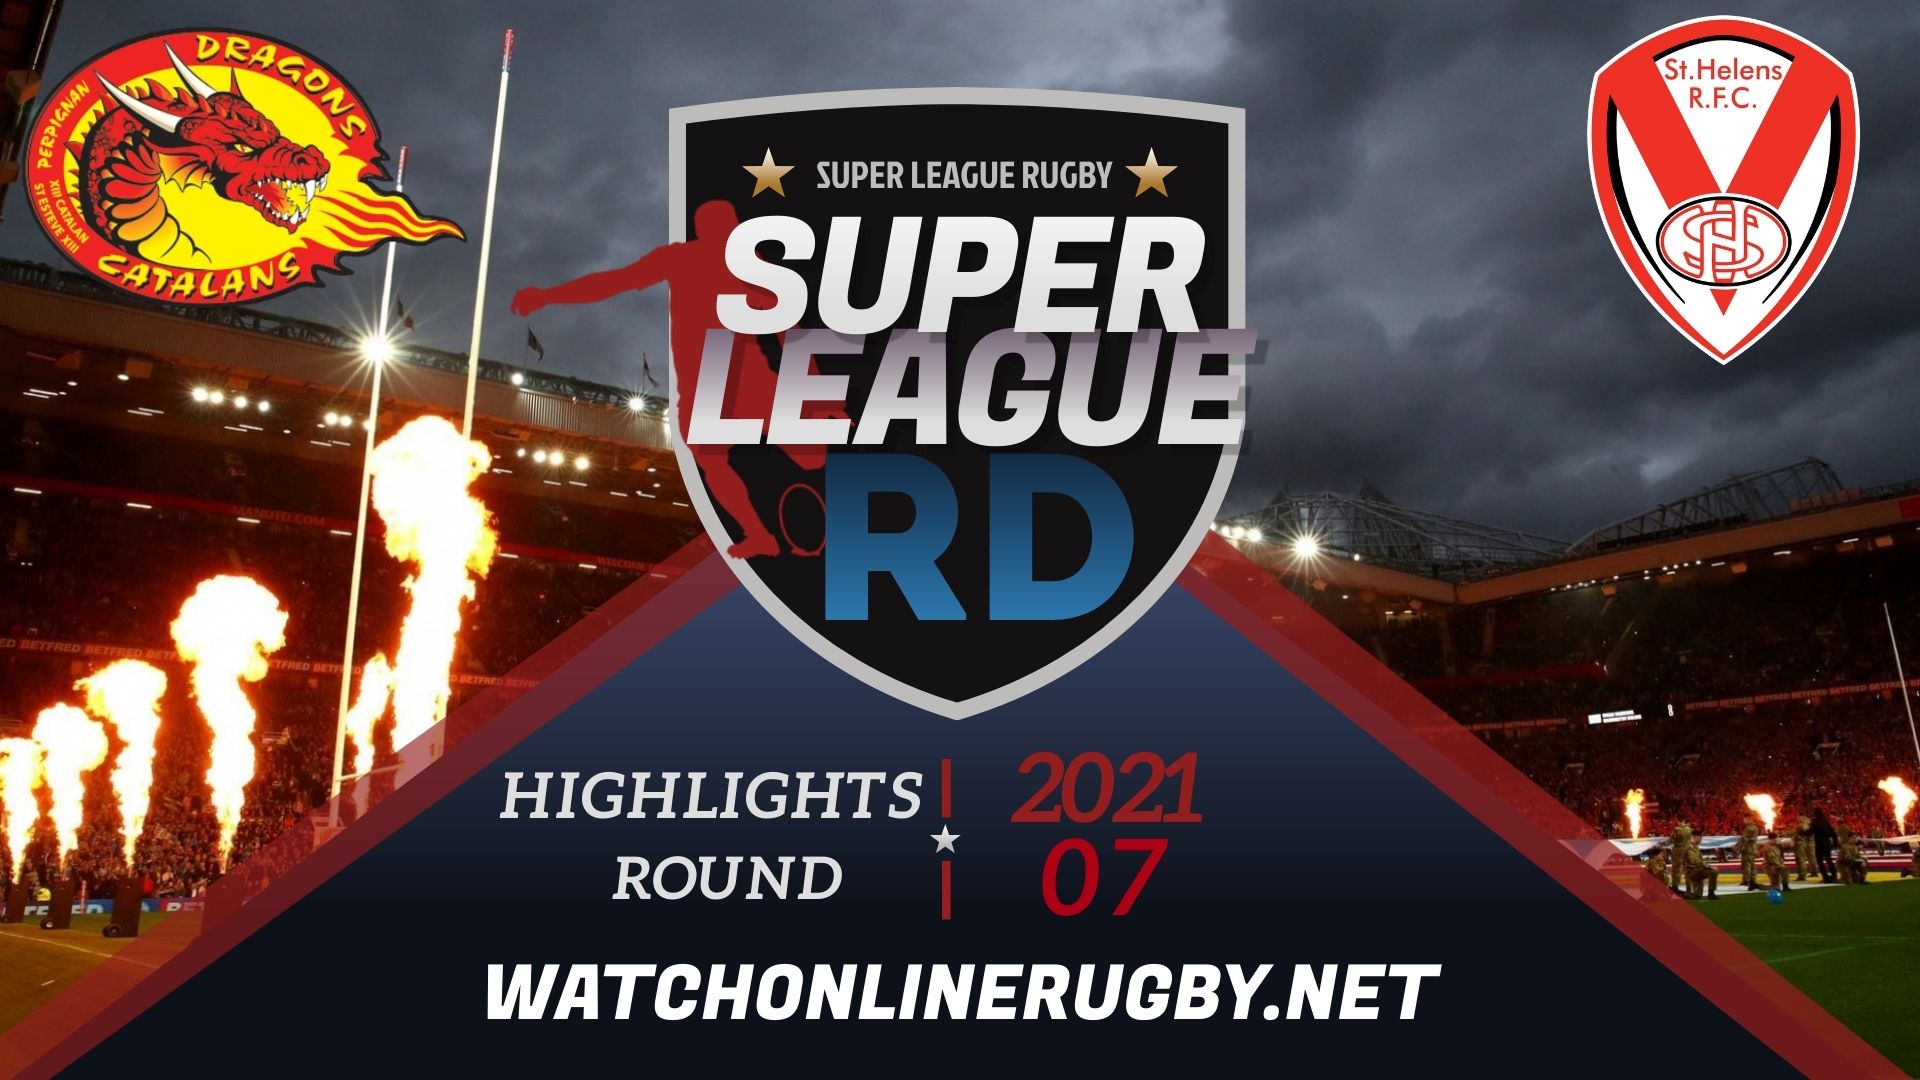 Catalans Dragons Vs St Helens Super League Rugby 2021 RD 7